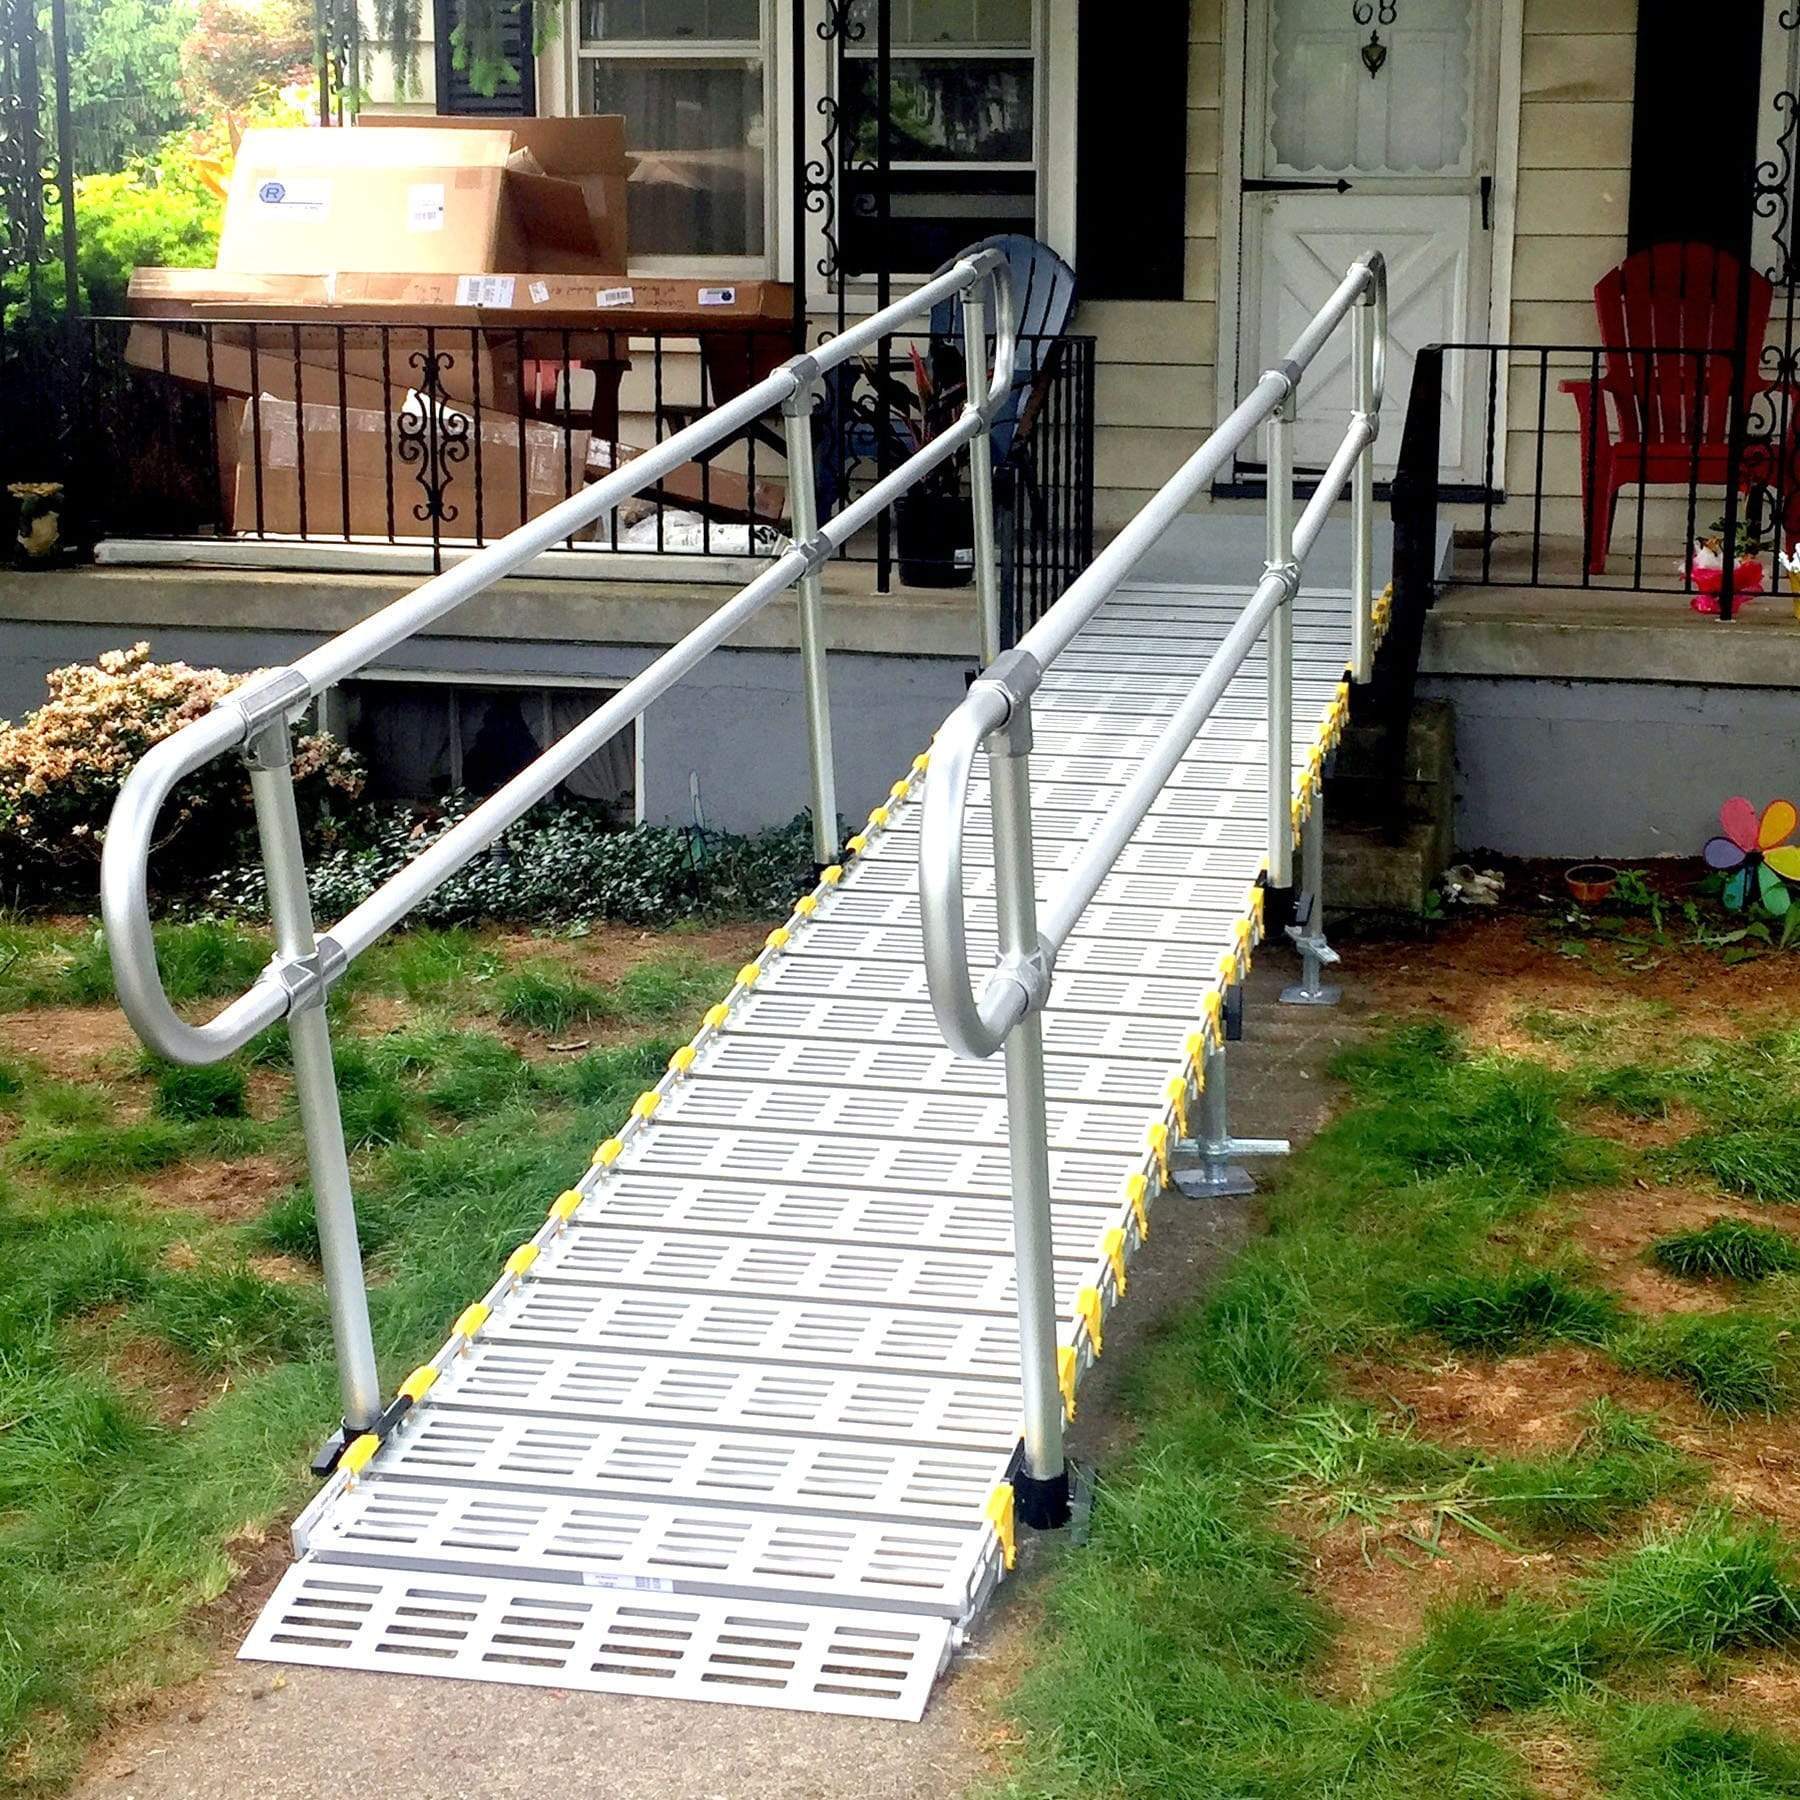 Roll-A-Ramp Modular Portable Ramp With Loop End Handrail On One Side M30-5-1L